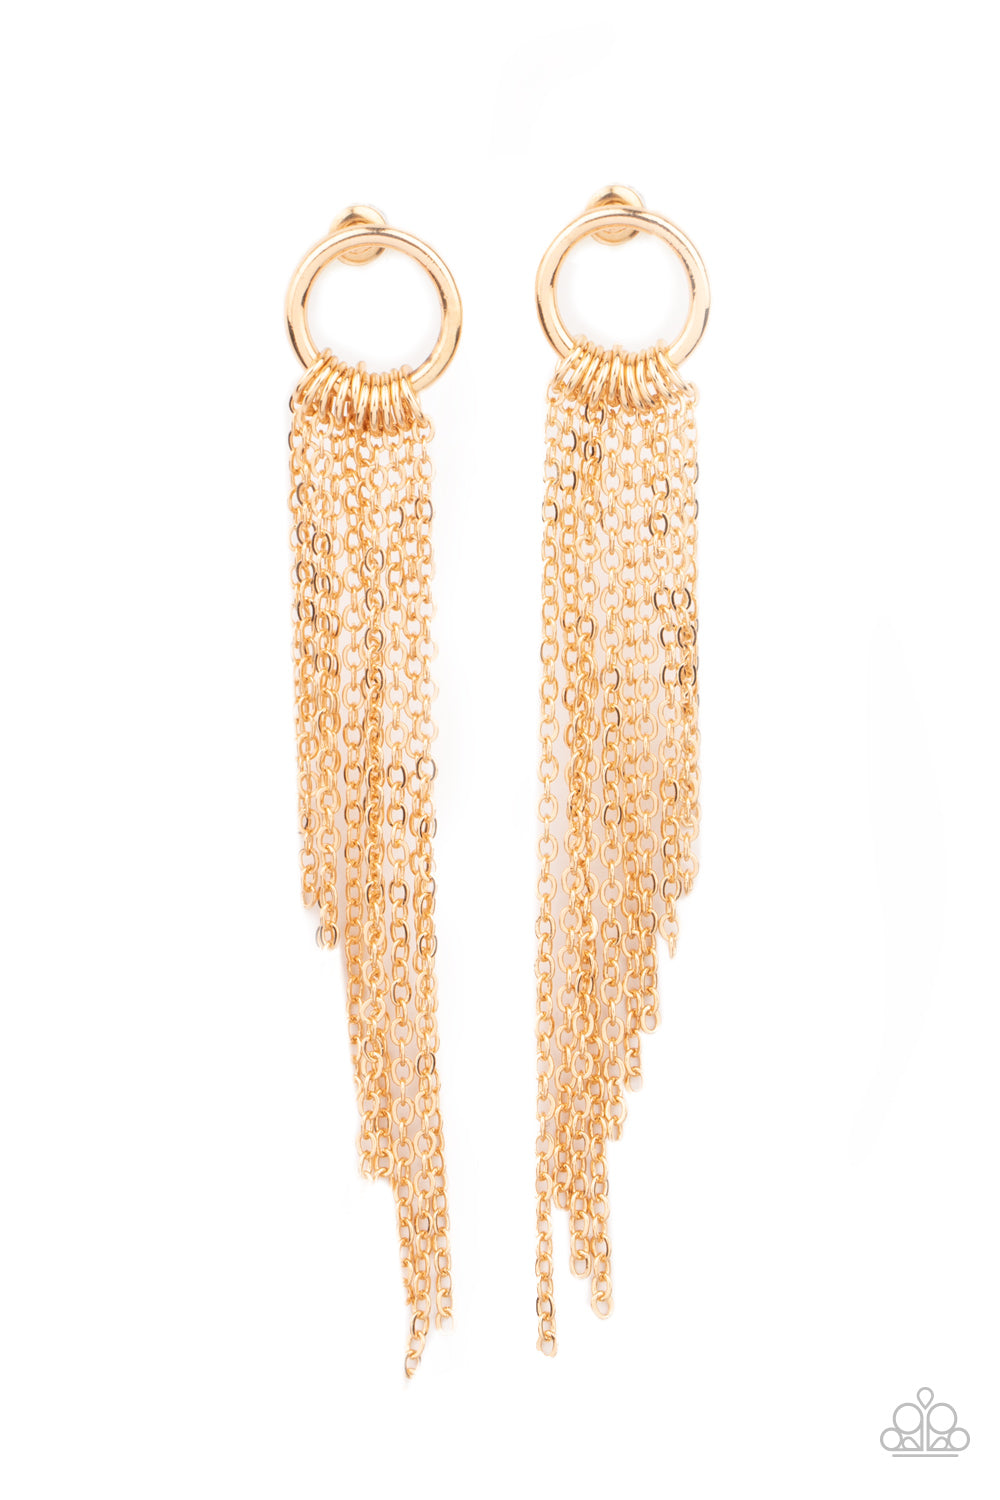 Divinely Dipping - paparazzi Gold earring (689)